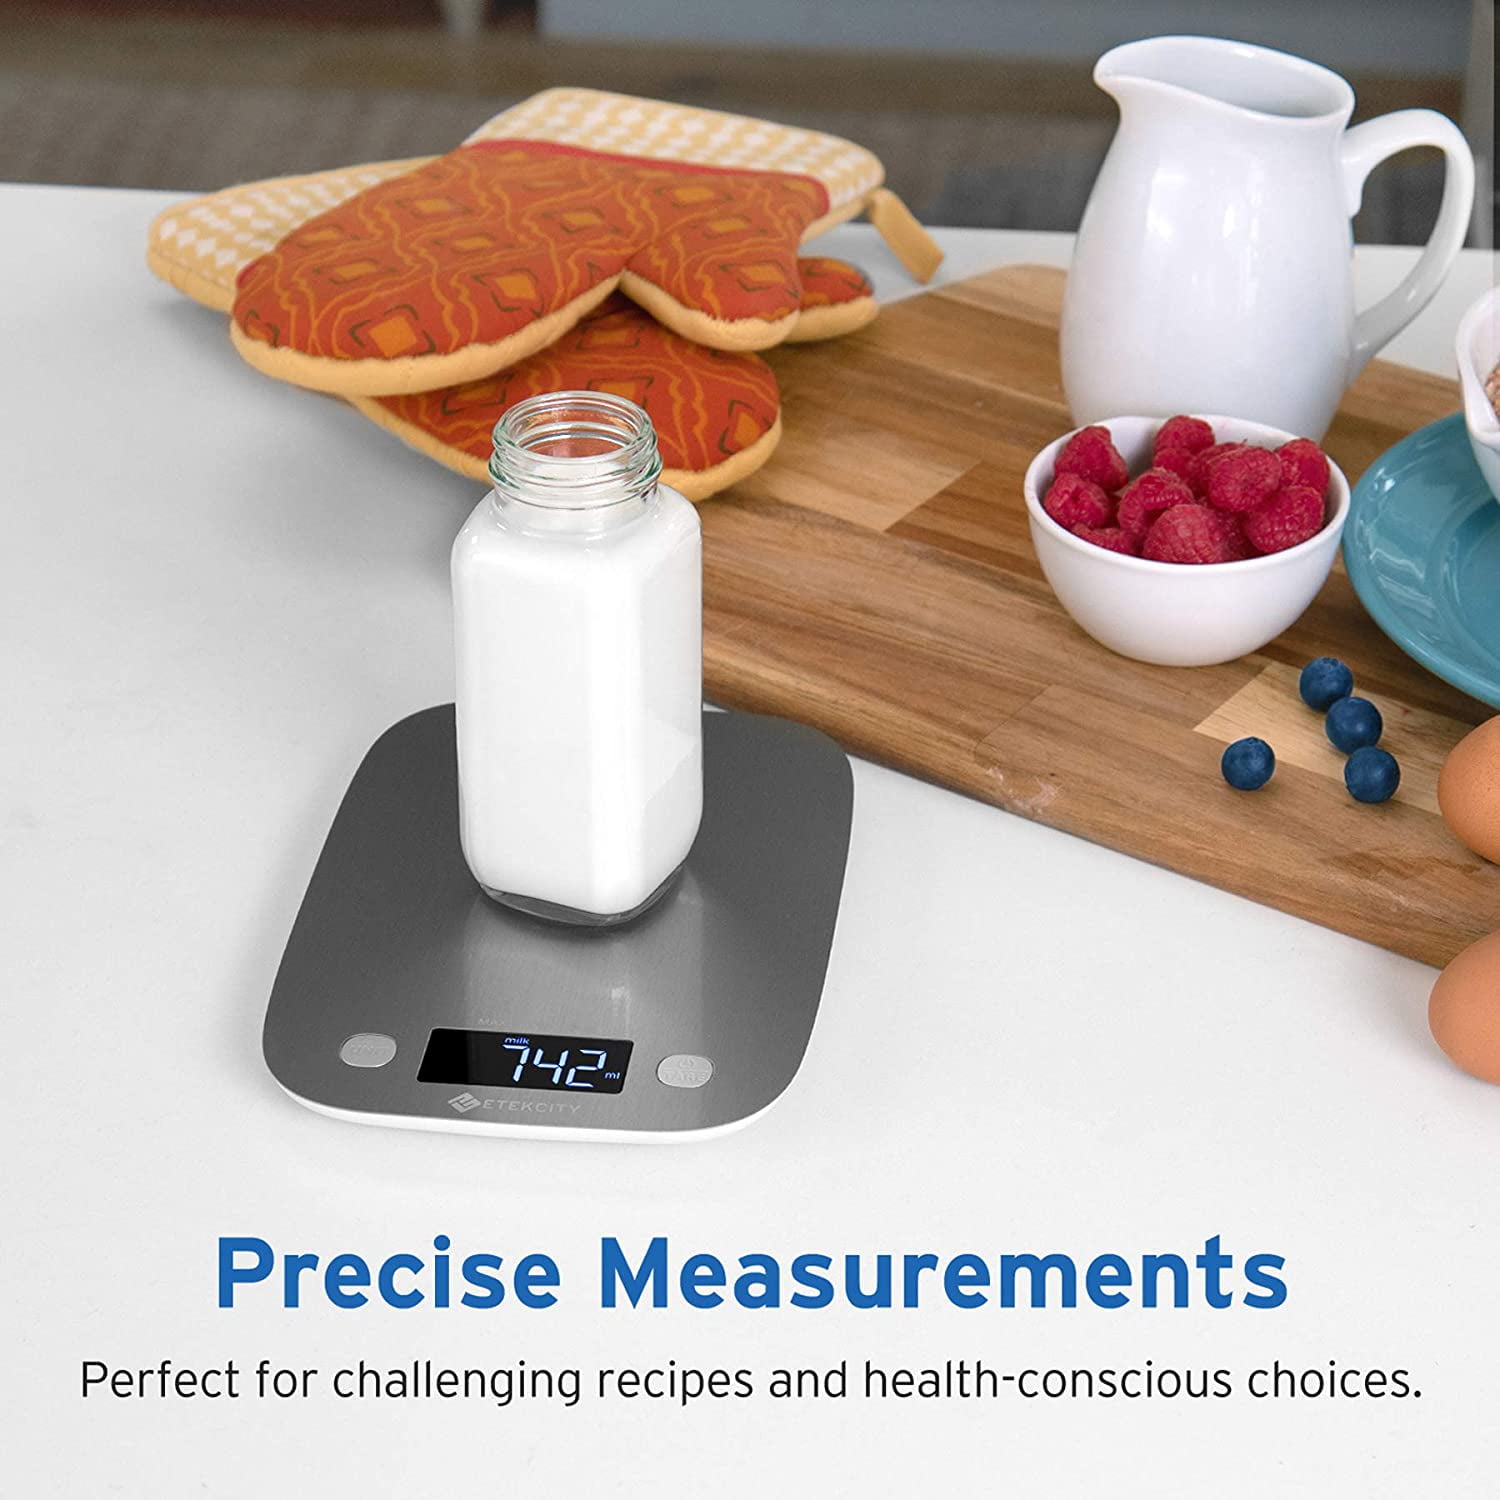 Get exact measurements w/ Etekcity's highly-rated digital food scale, now  down to $10 (25% off)